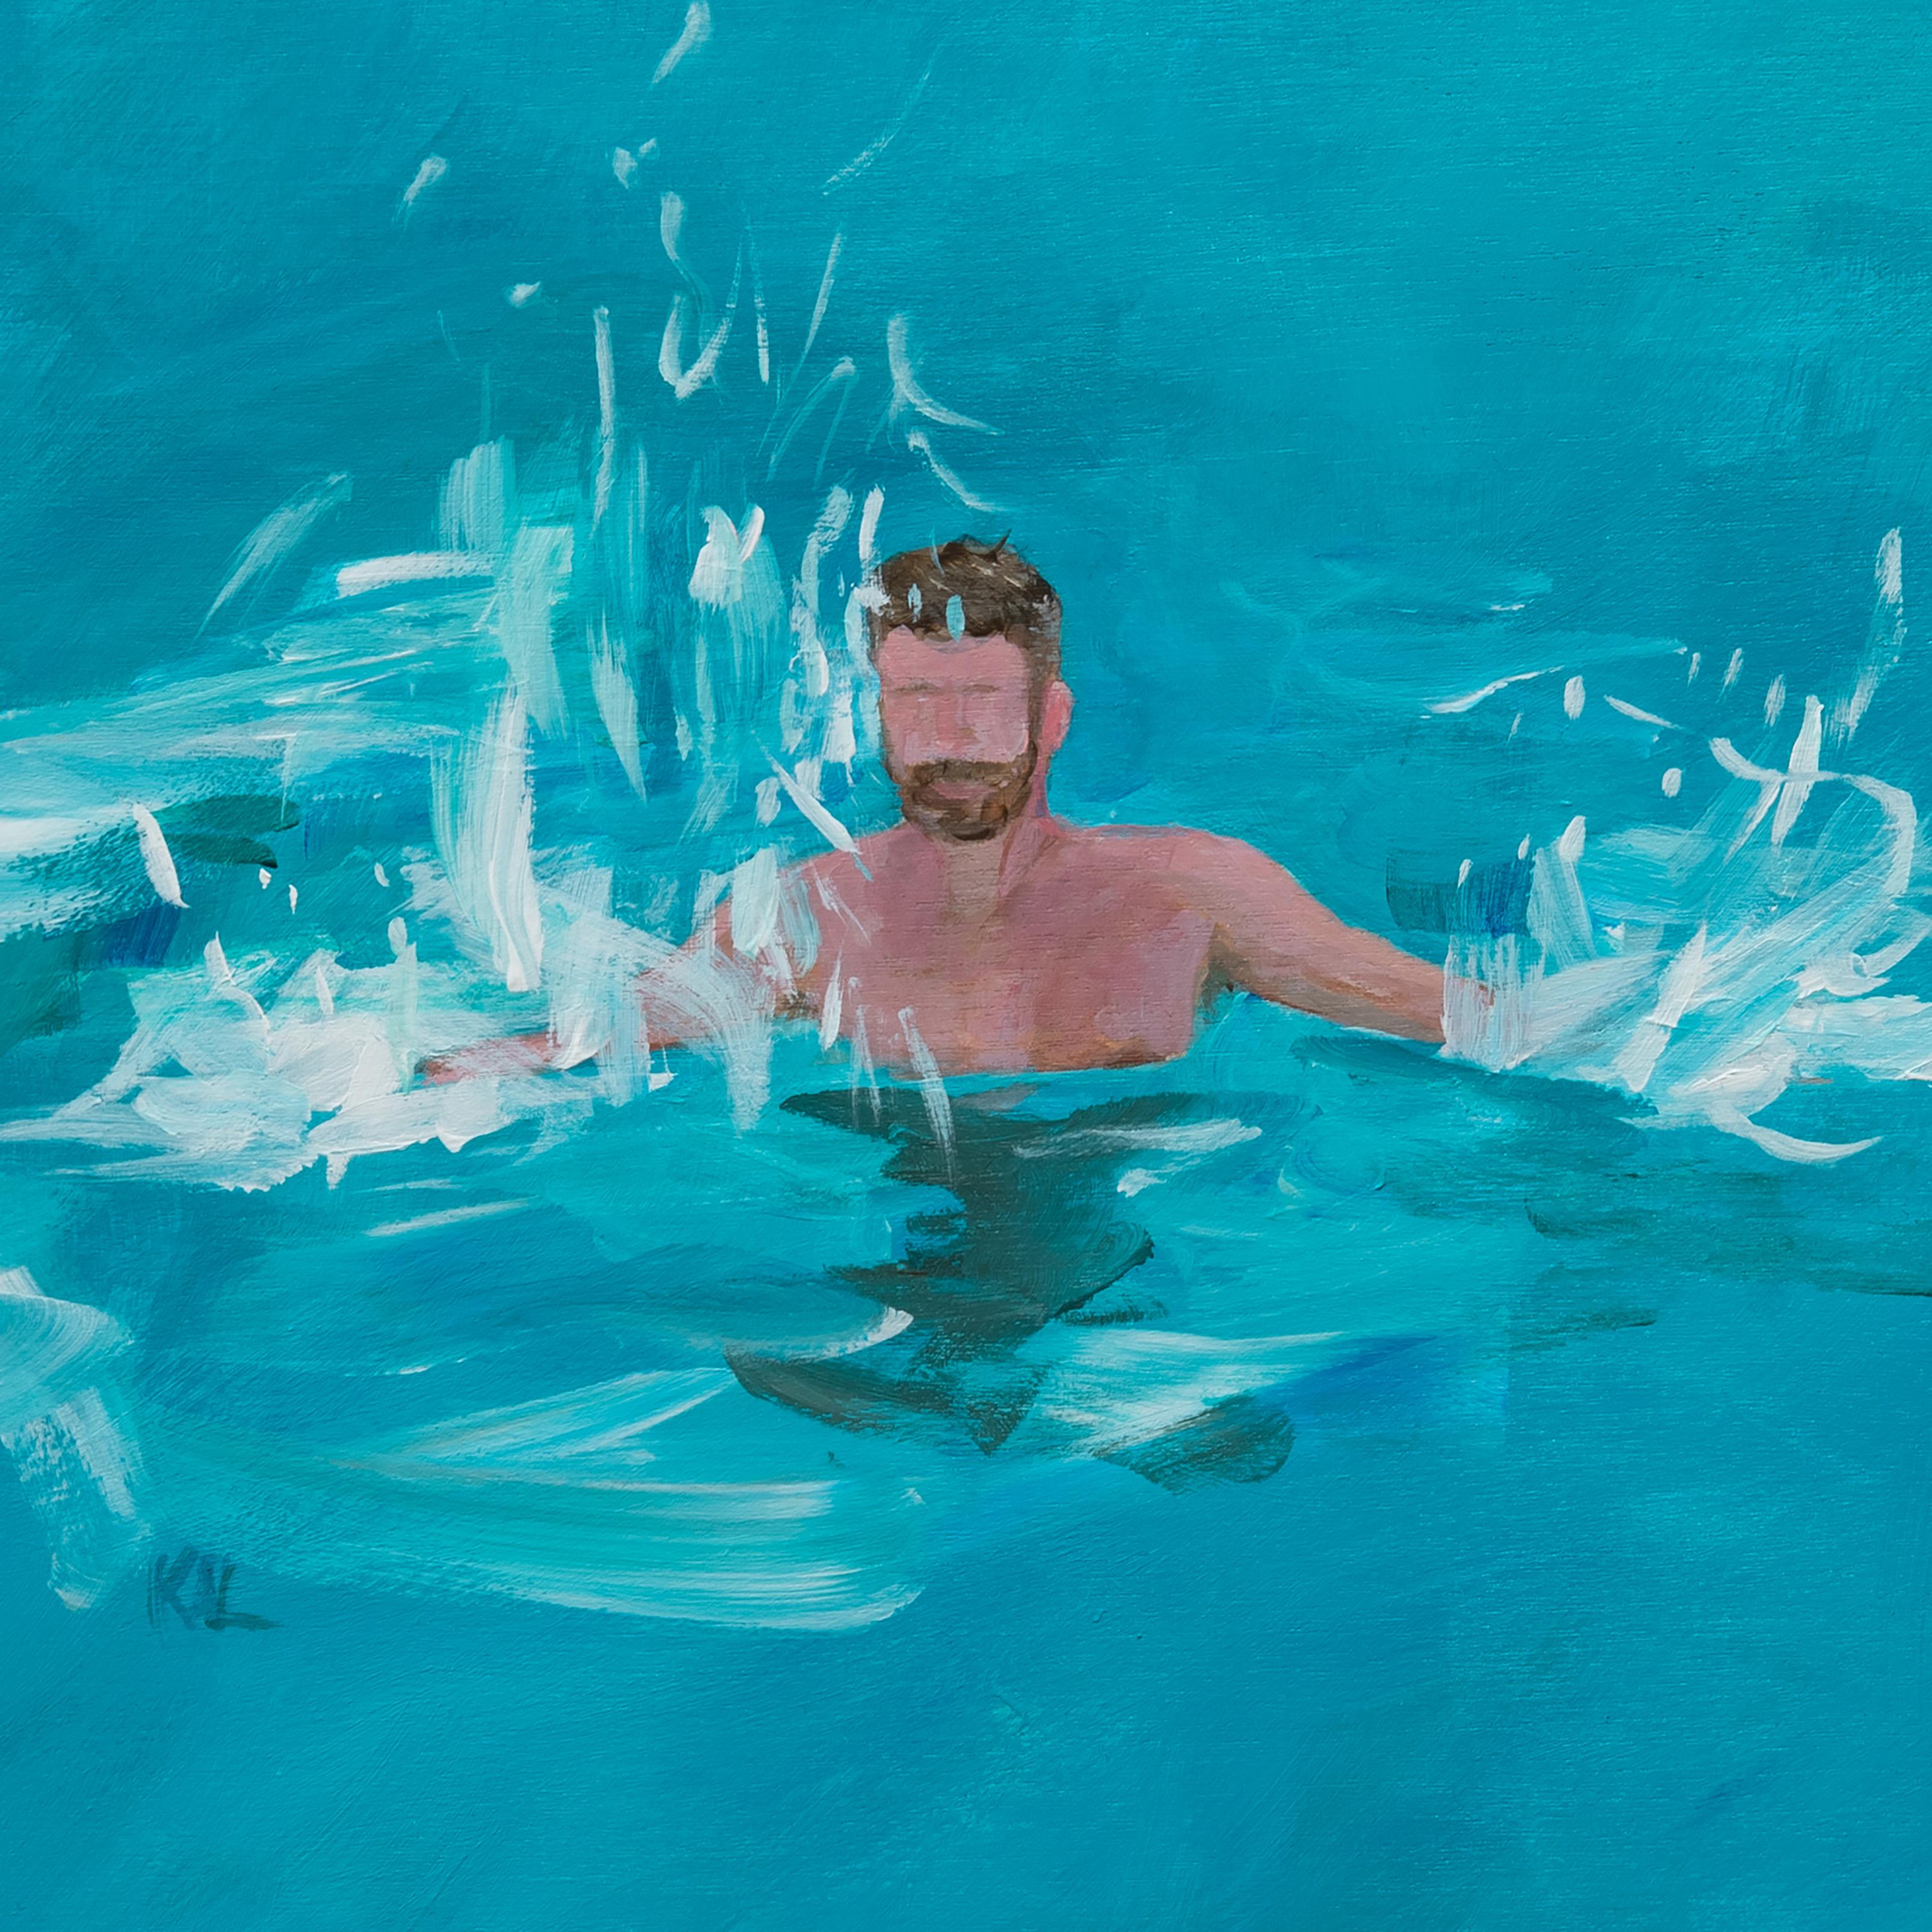 “Immersion”- acrylic on wood - Painting by Kory Alexander